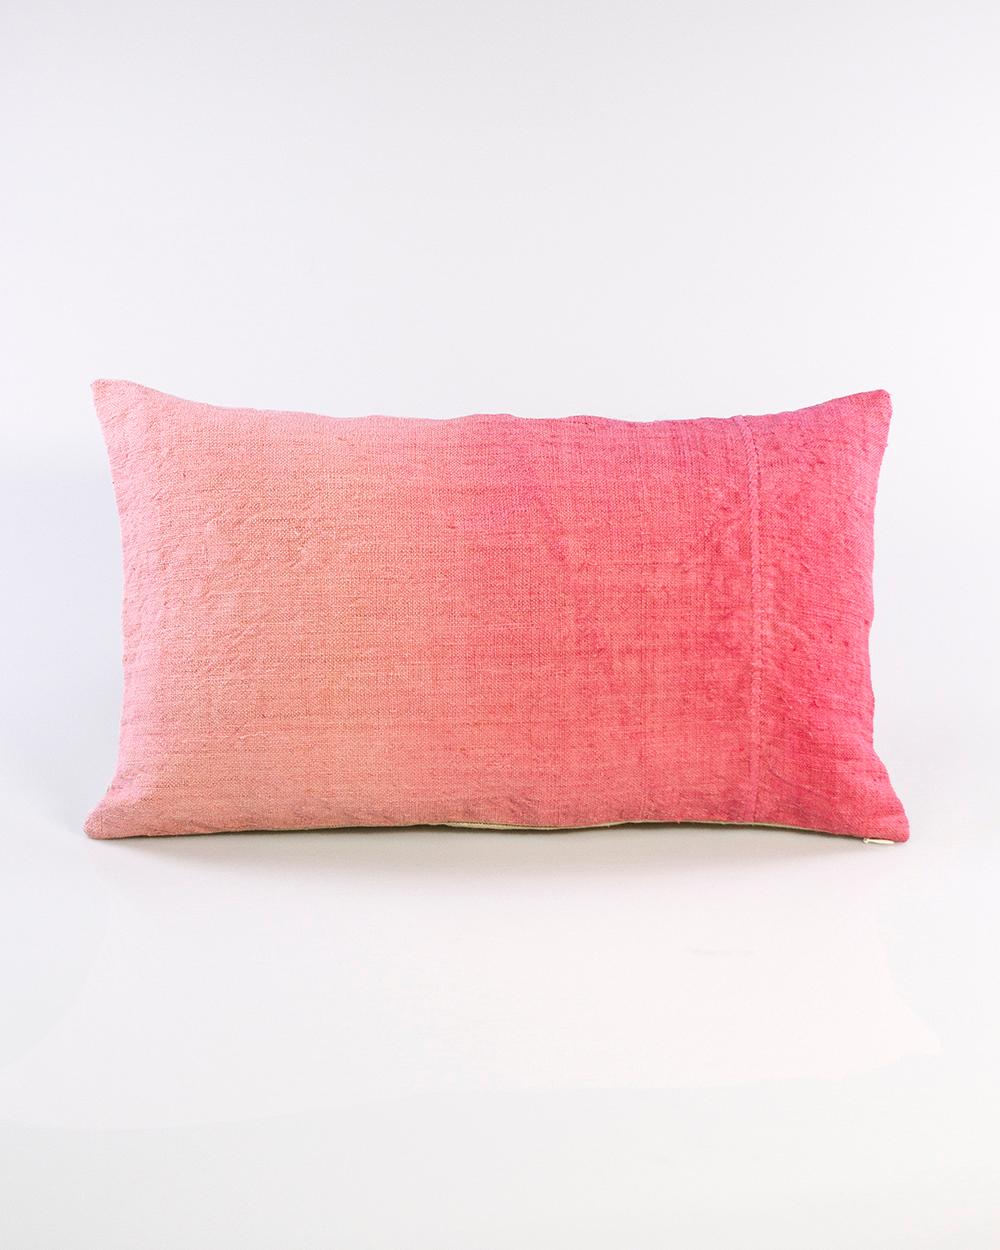 Espanyolet Hand-Painted Vintage Linen Throw Pillow in Pink Ombre 16